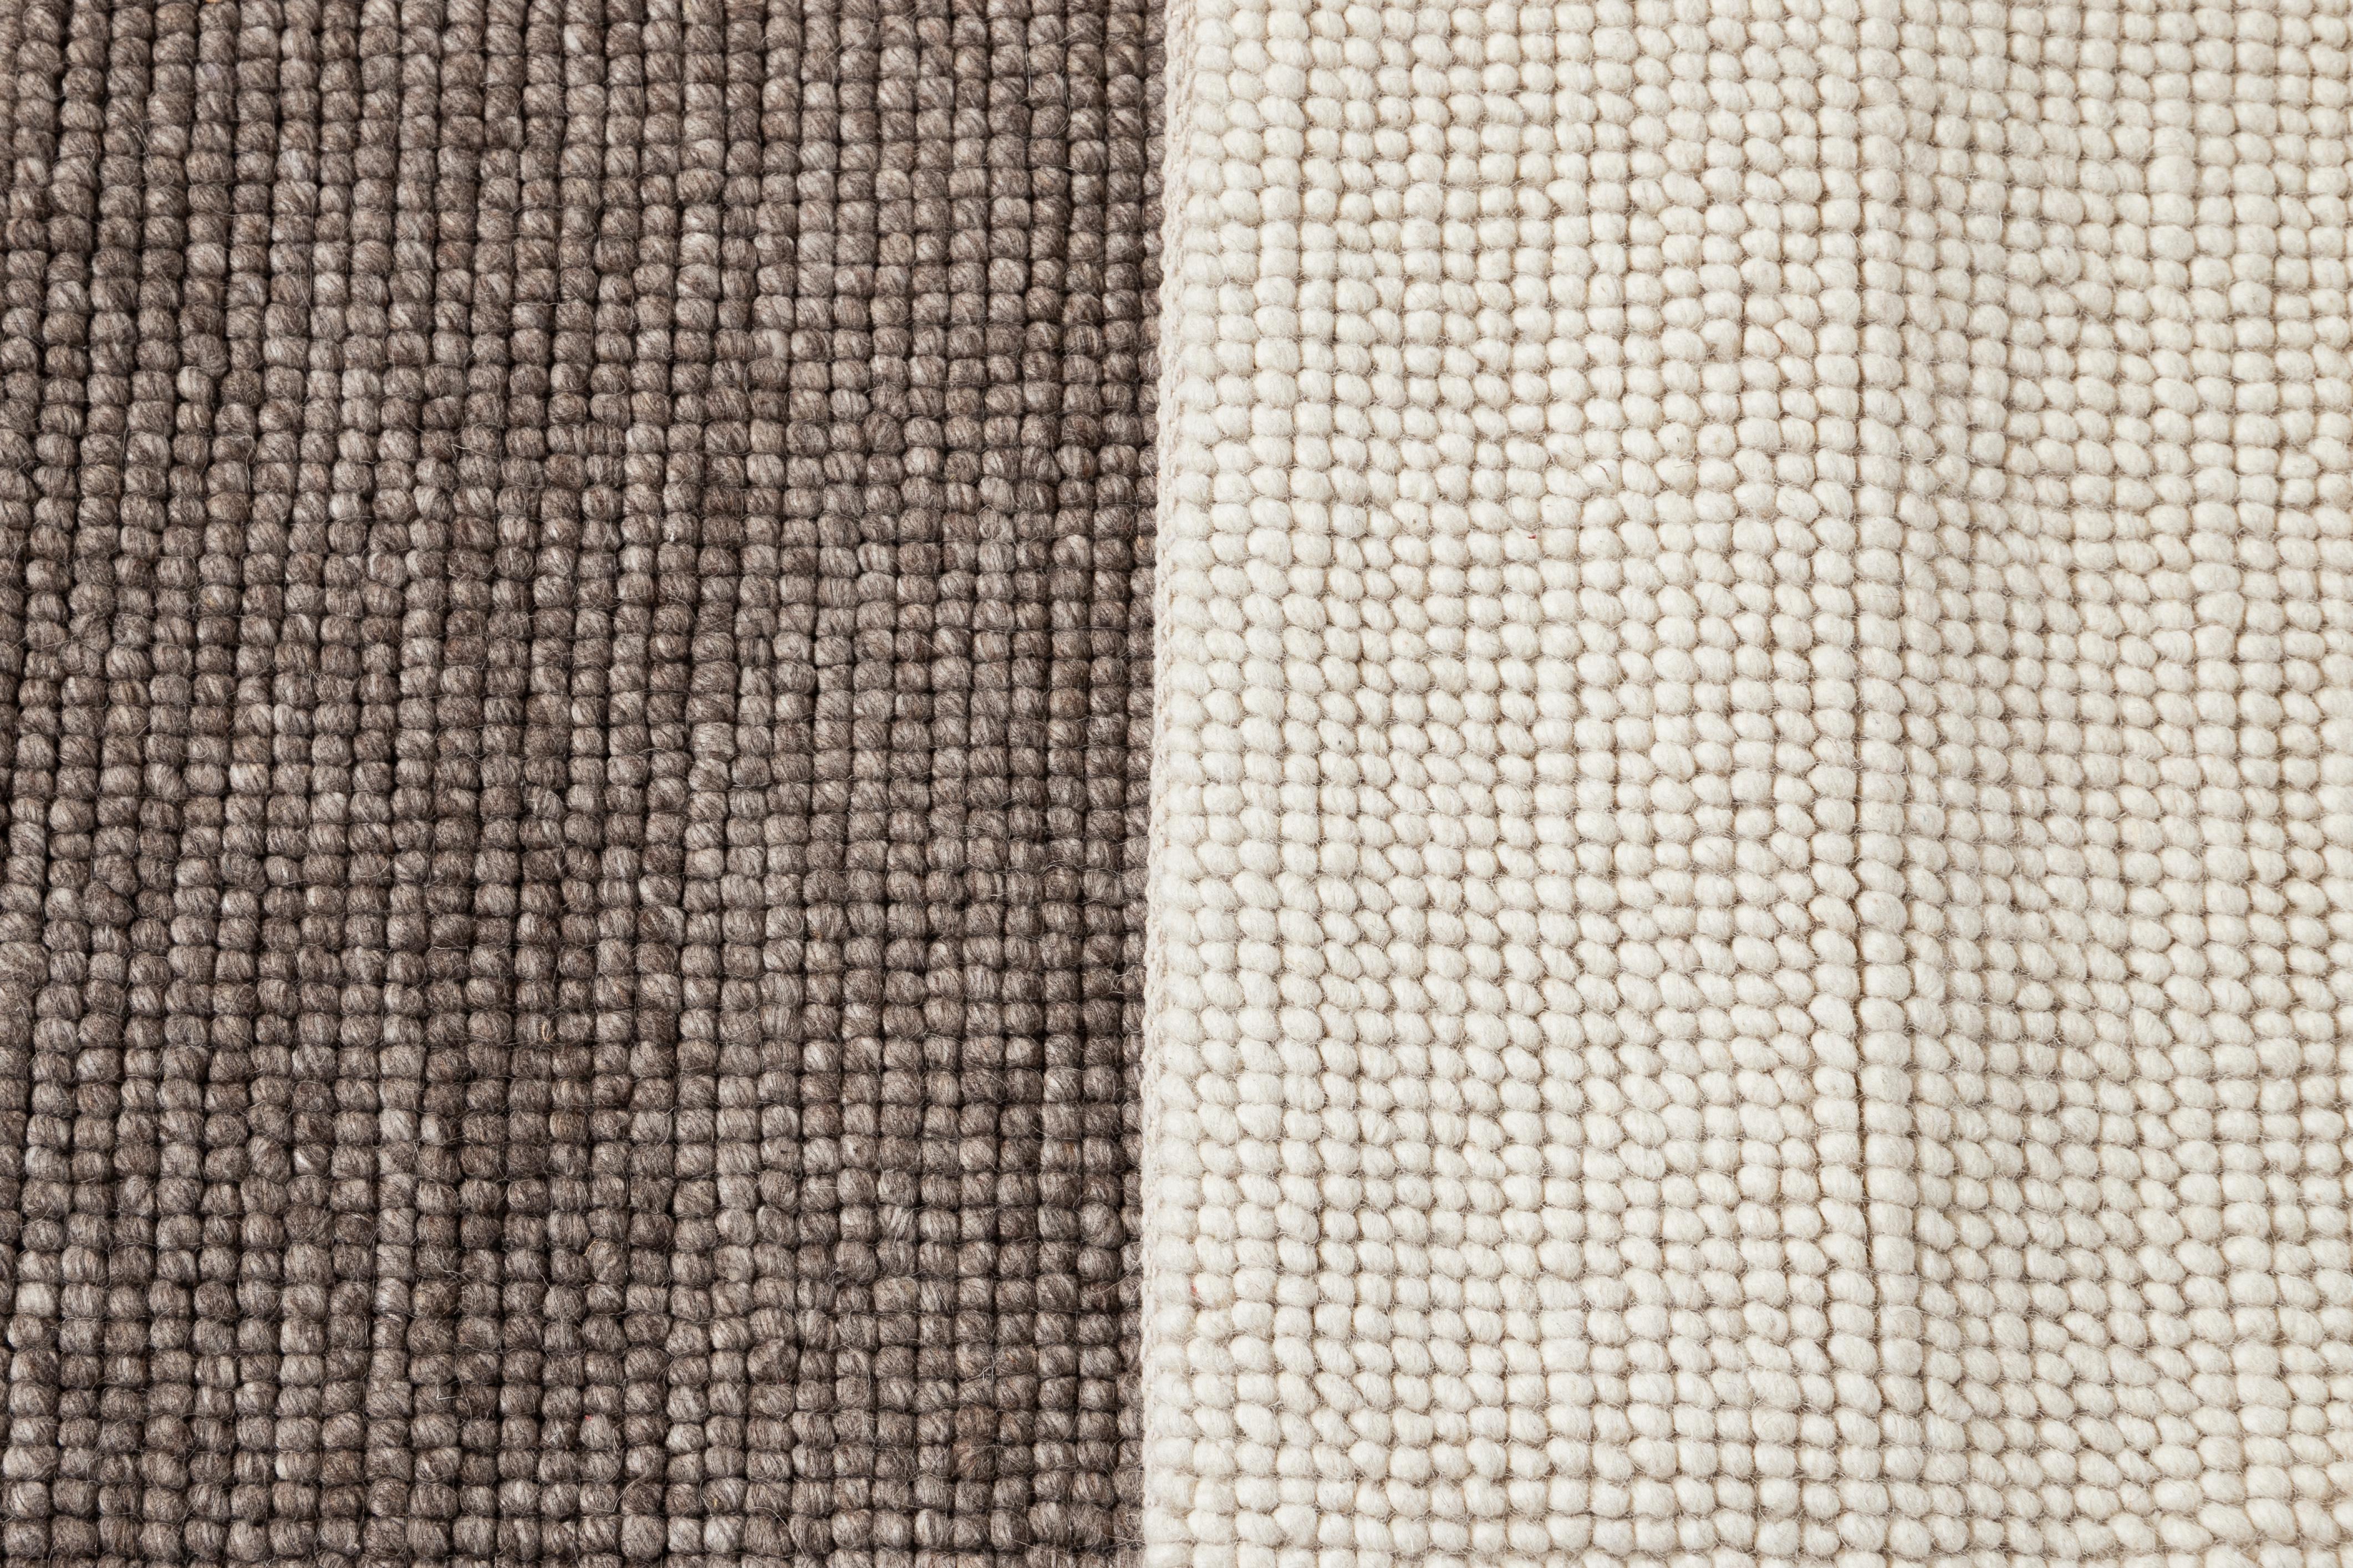 Solid-colored woven wool textured custom rug. Custom sizes and colors made-to-order.

Collection: Easton
Material: 100% wool
Lead time: Approx. 12 wks
Available Colors: Beige, white
Made in India

Price listed for an 8' x 10' rug.